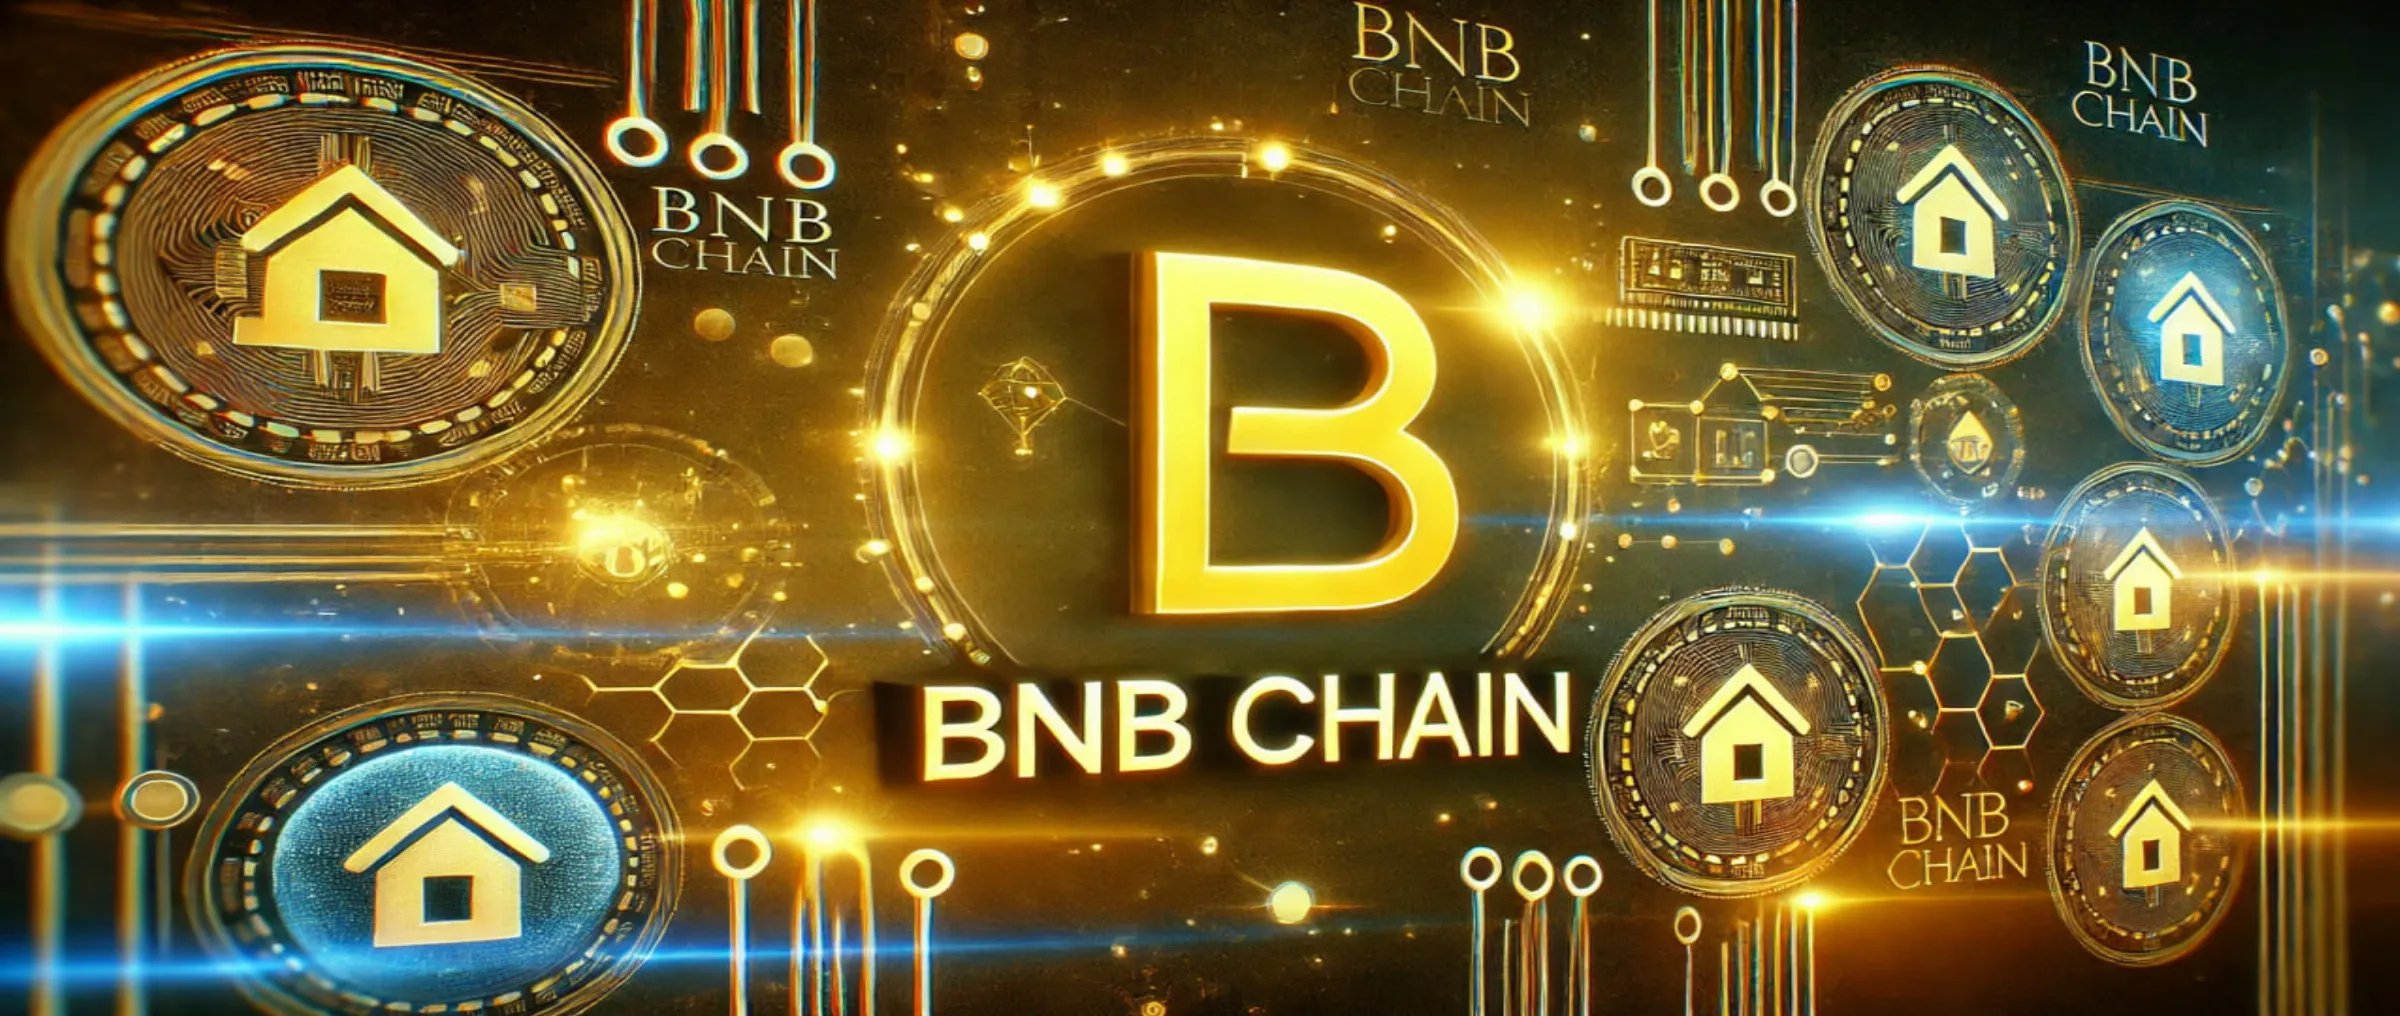 Transaction fees on the BNB Chain network have been reduced by 90% thanks to BEP 336